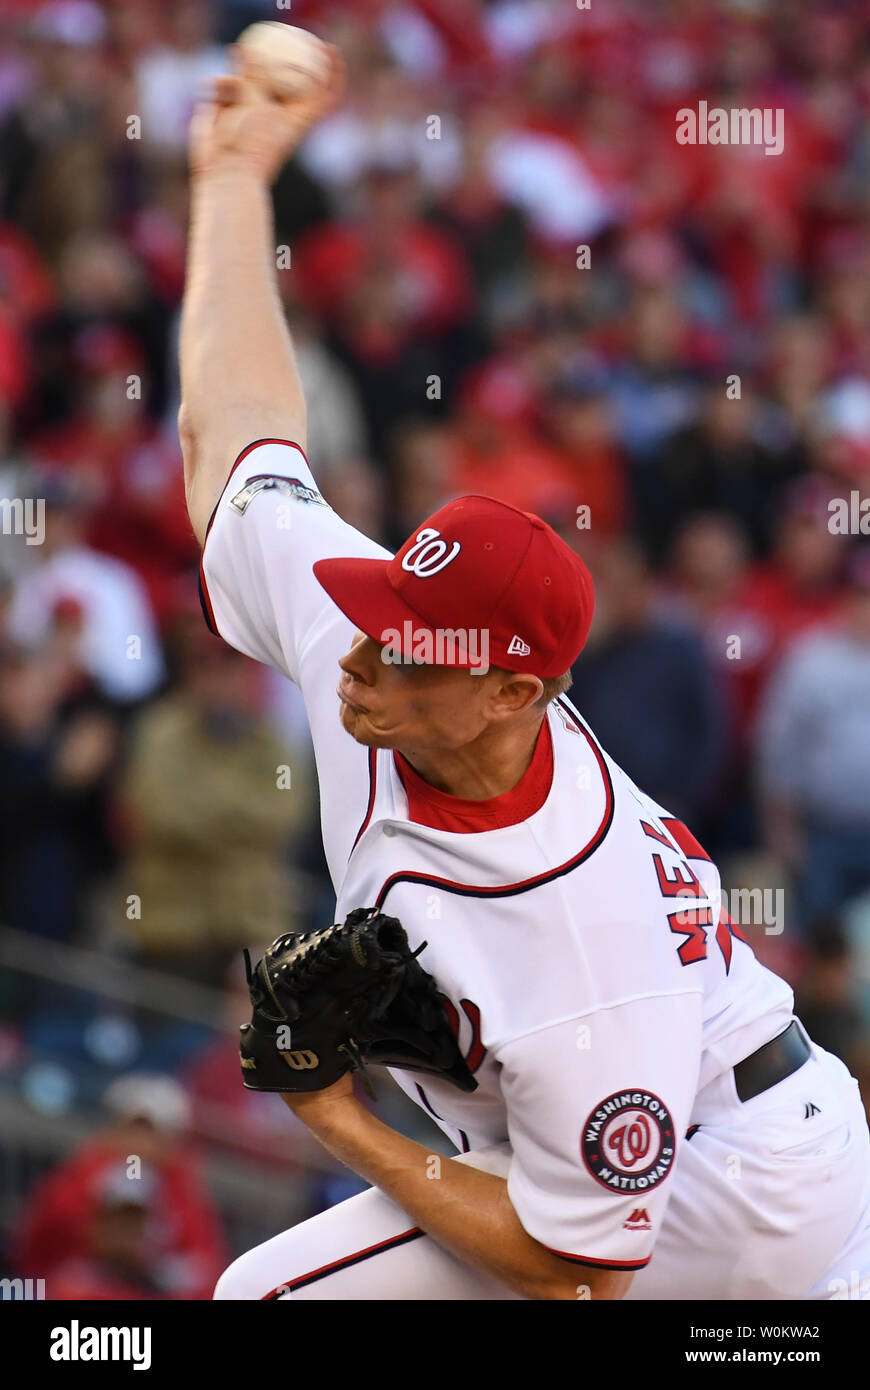 Washington Nationals closer Mark Melancon throws against the Los Angeles Dodgers during the ninth inning in game 2 of the National League Division Series at Nationals Park in Washington, D.C., October 9, 2016. Washington beat Los Angeles 5-2 to even the NLDS at 1-1.  Photo by Pat Benic/UPI Stock Photo